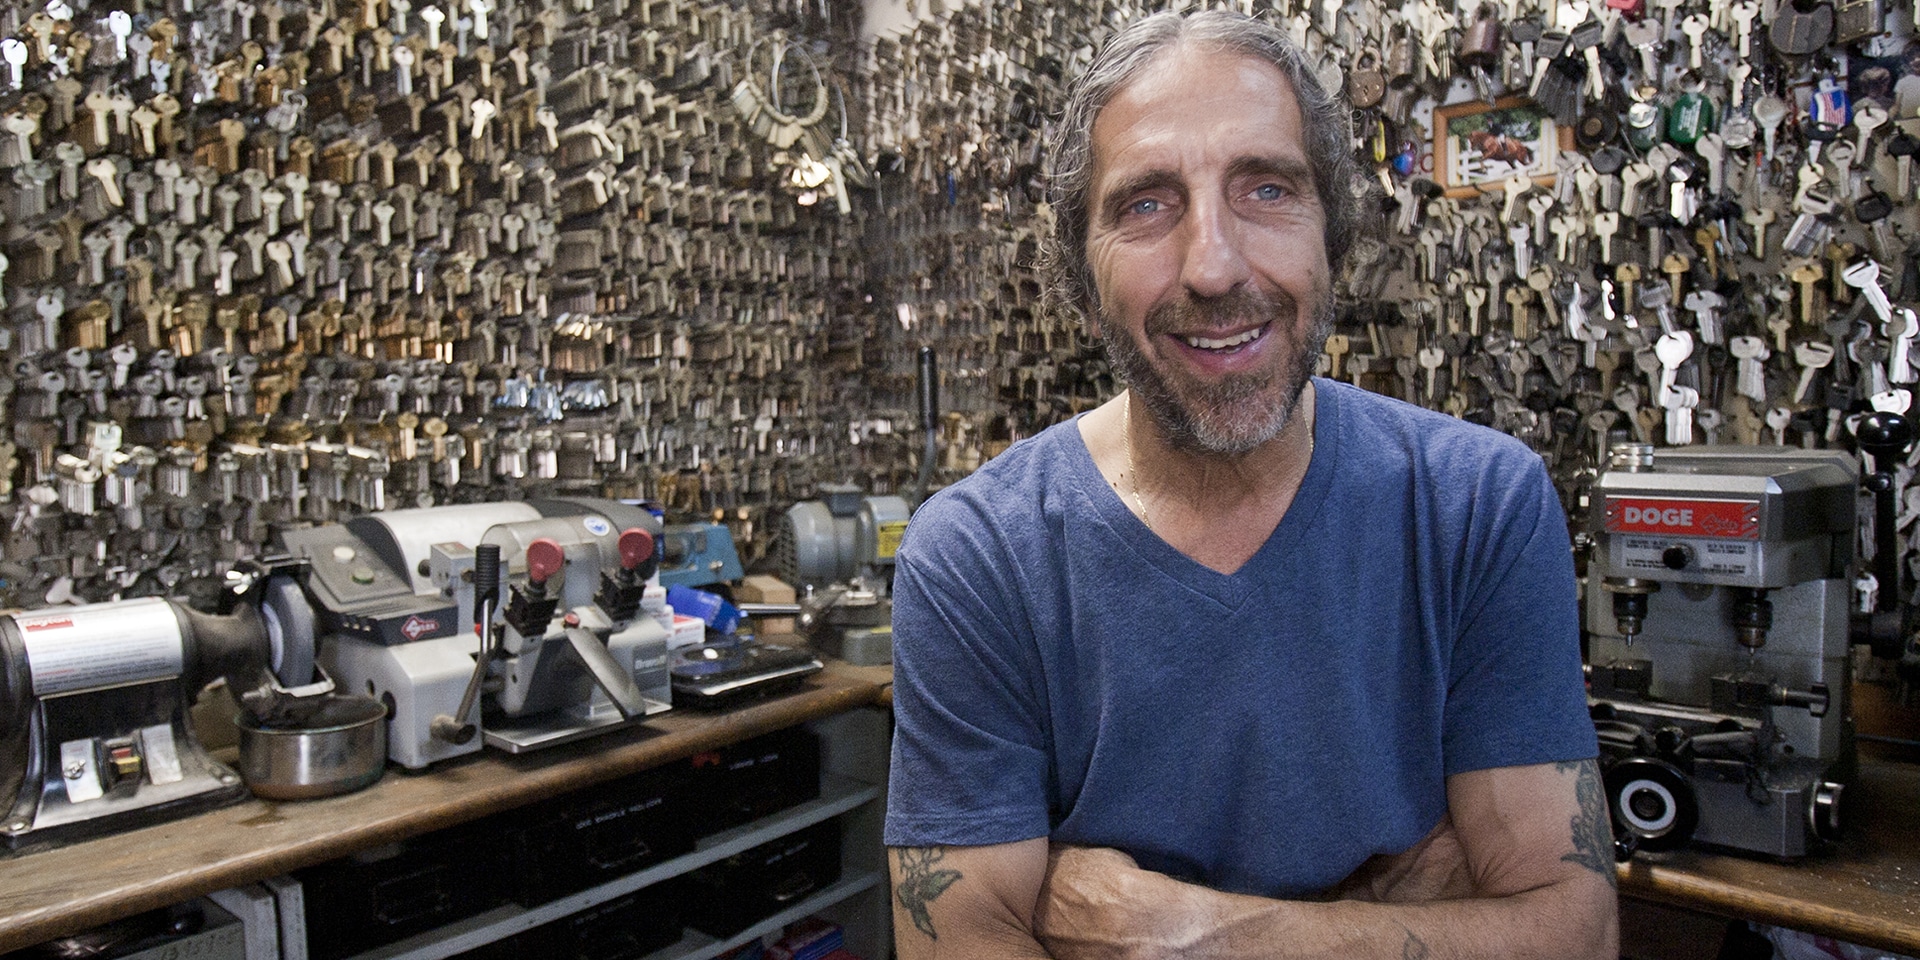 Greenwich Locksmiths owner and founder Philip Mortillaro has been a locksmith his entire life since he started his first store in 1968 at the age of 18